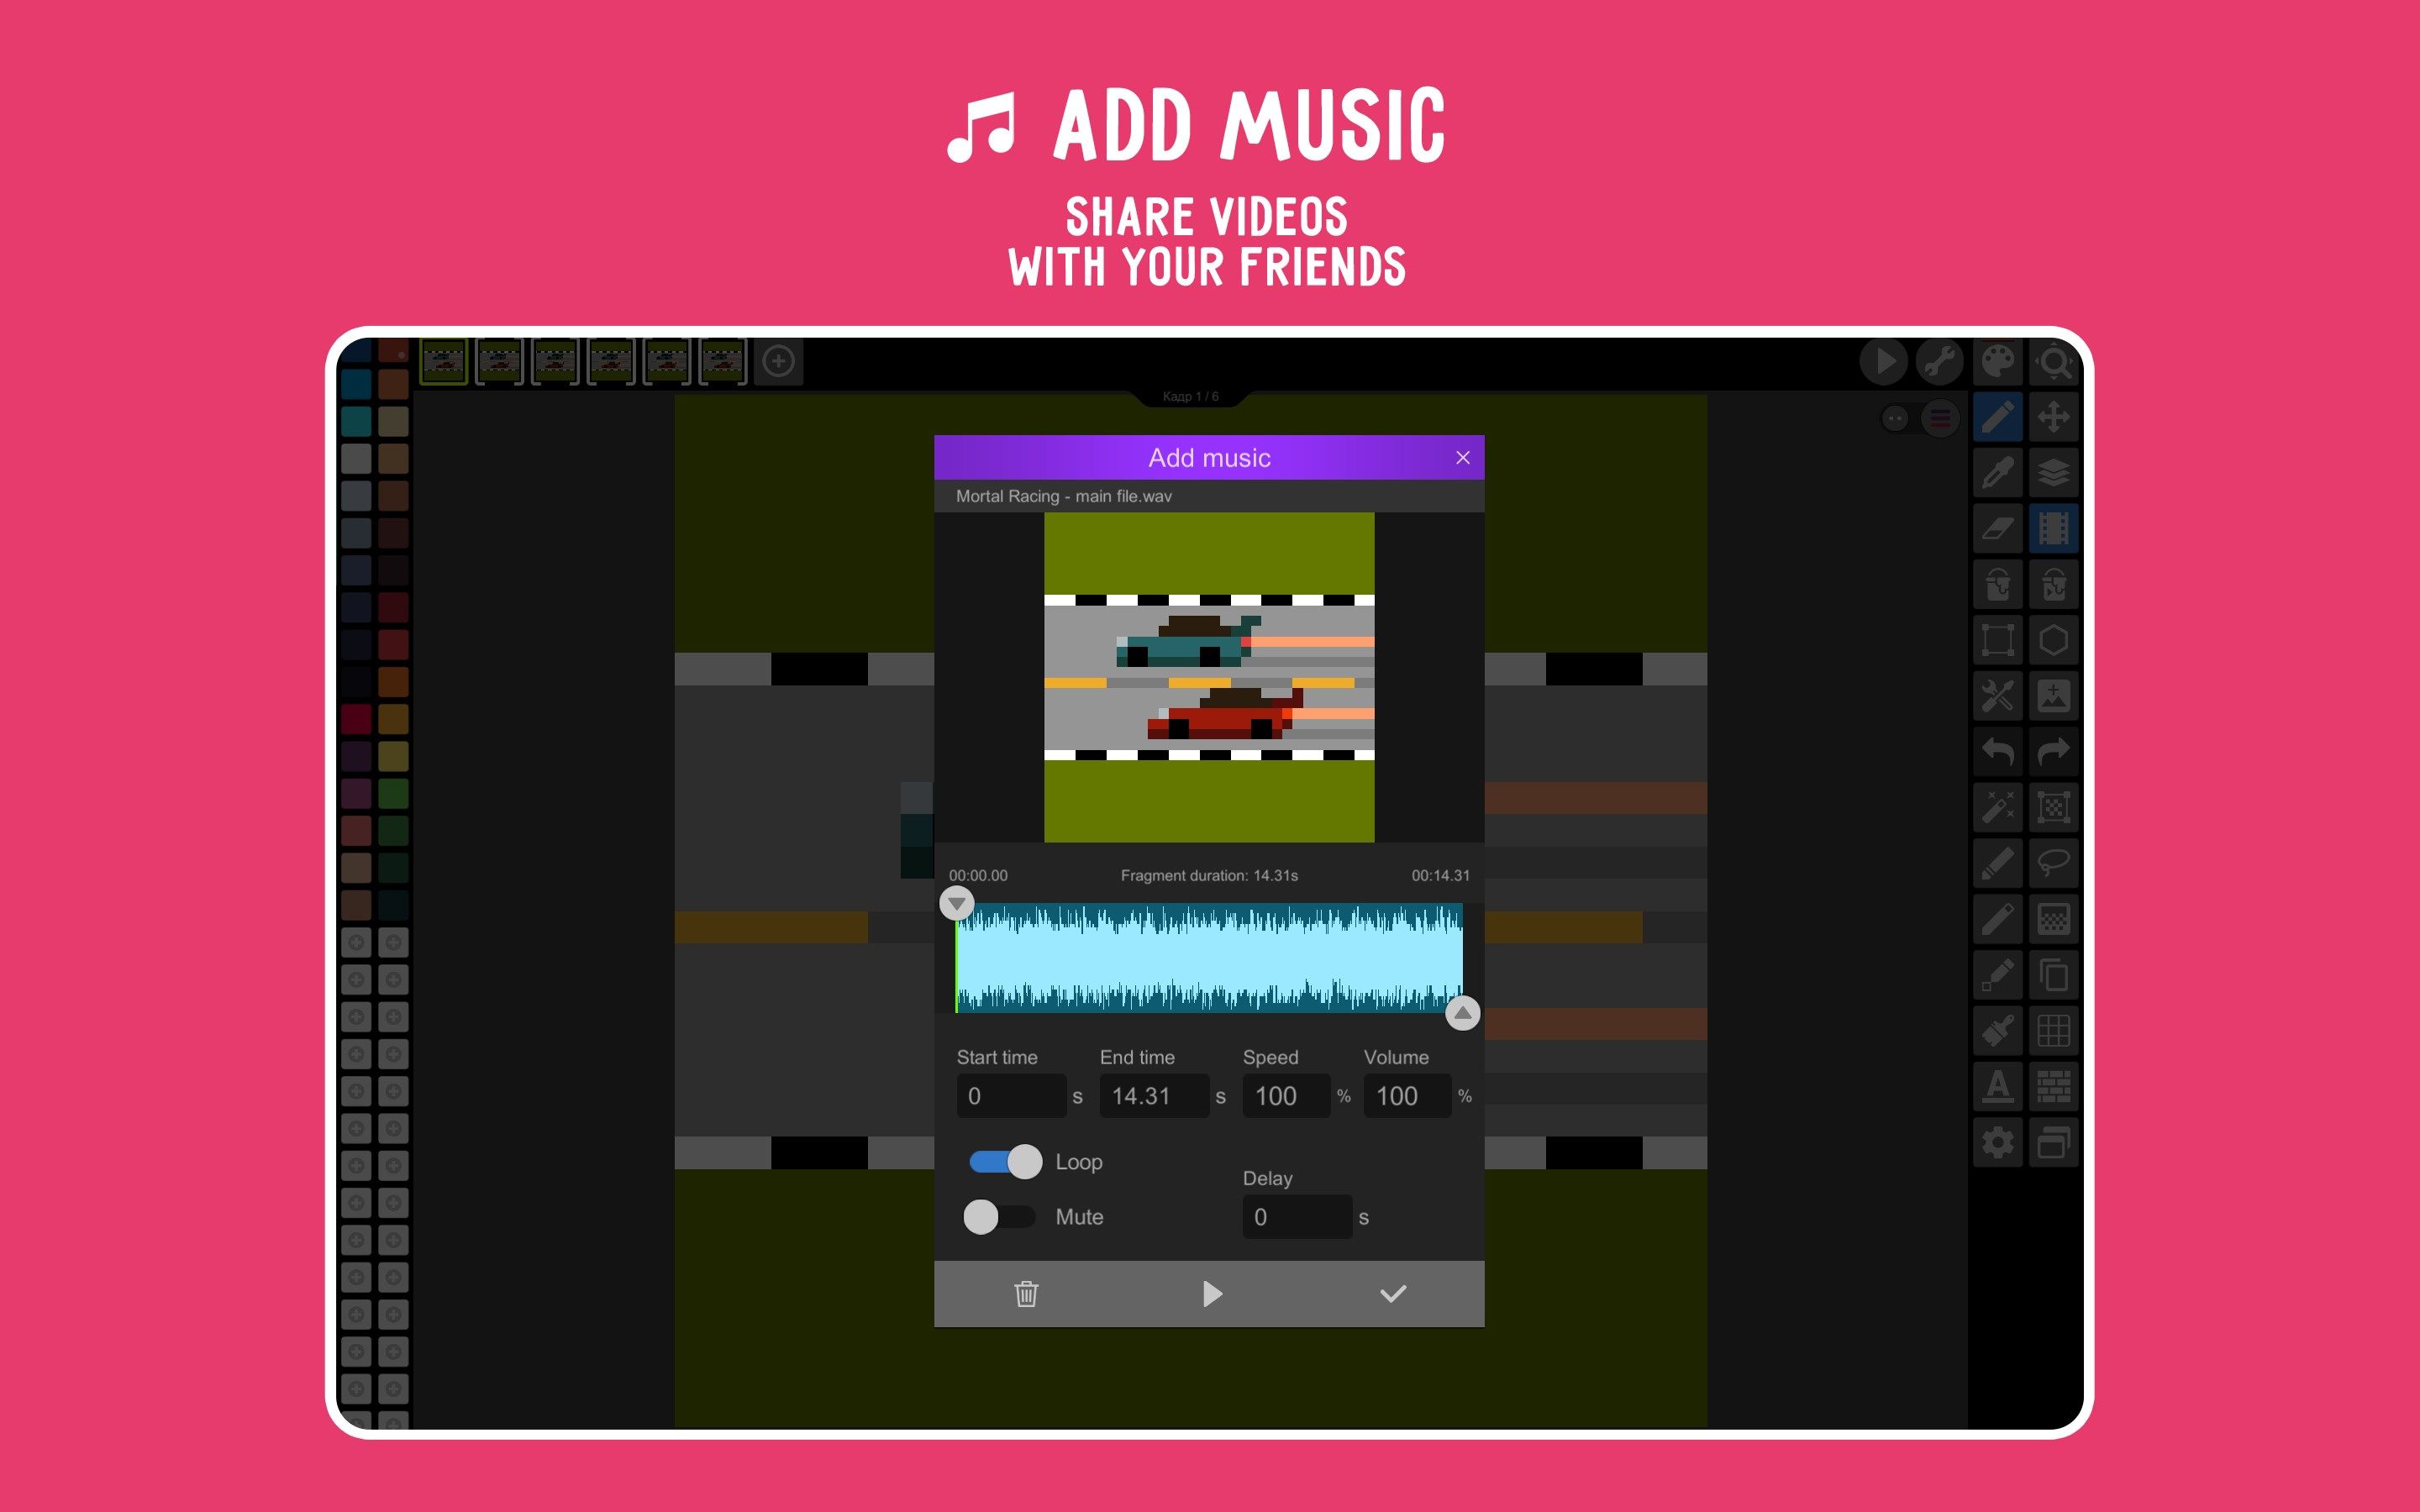 Add music and share videos